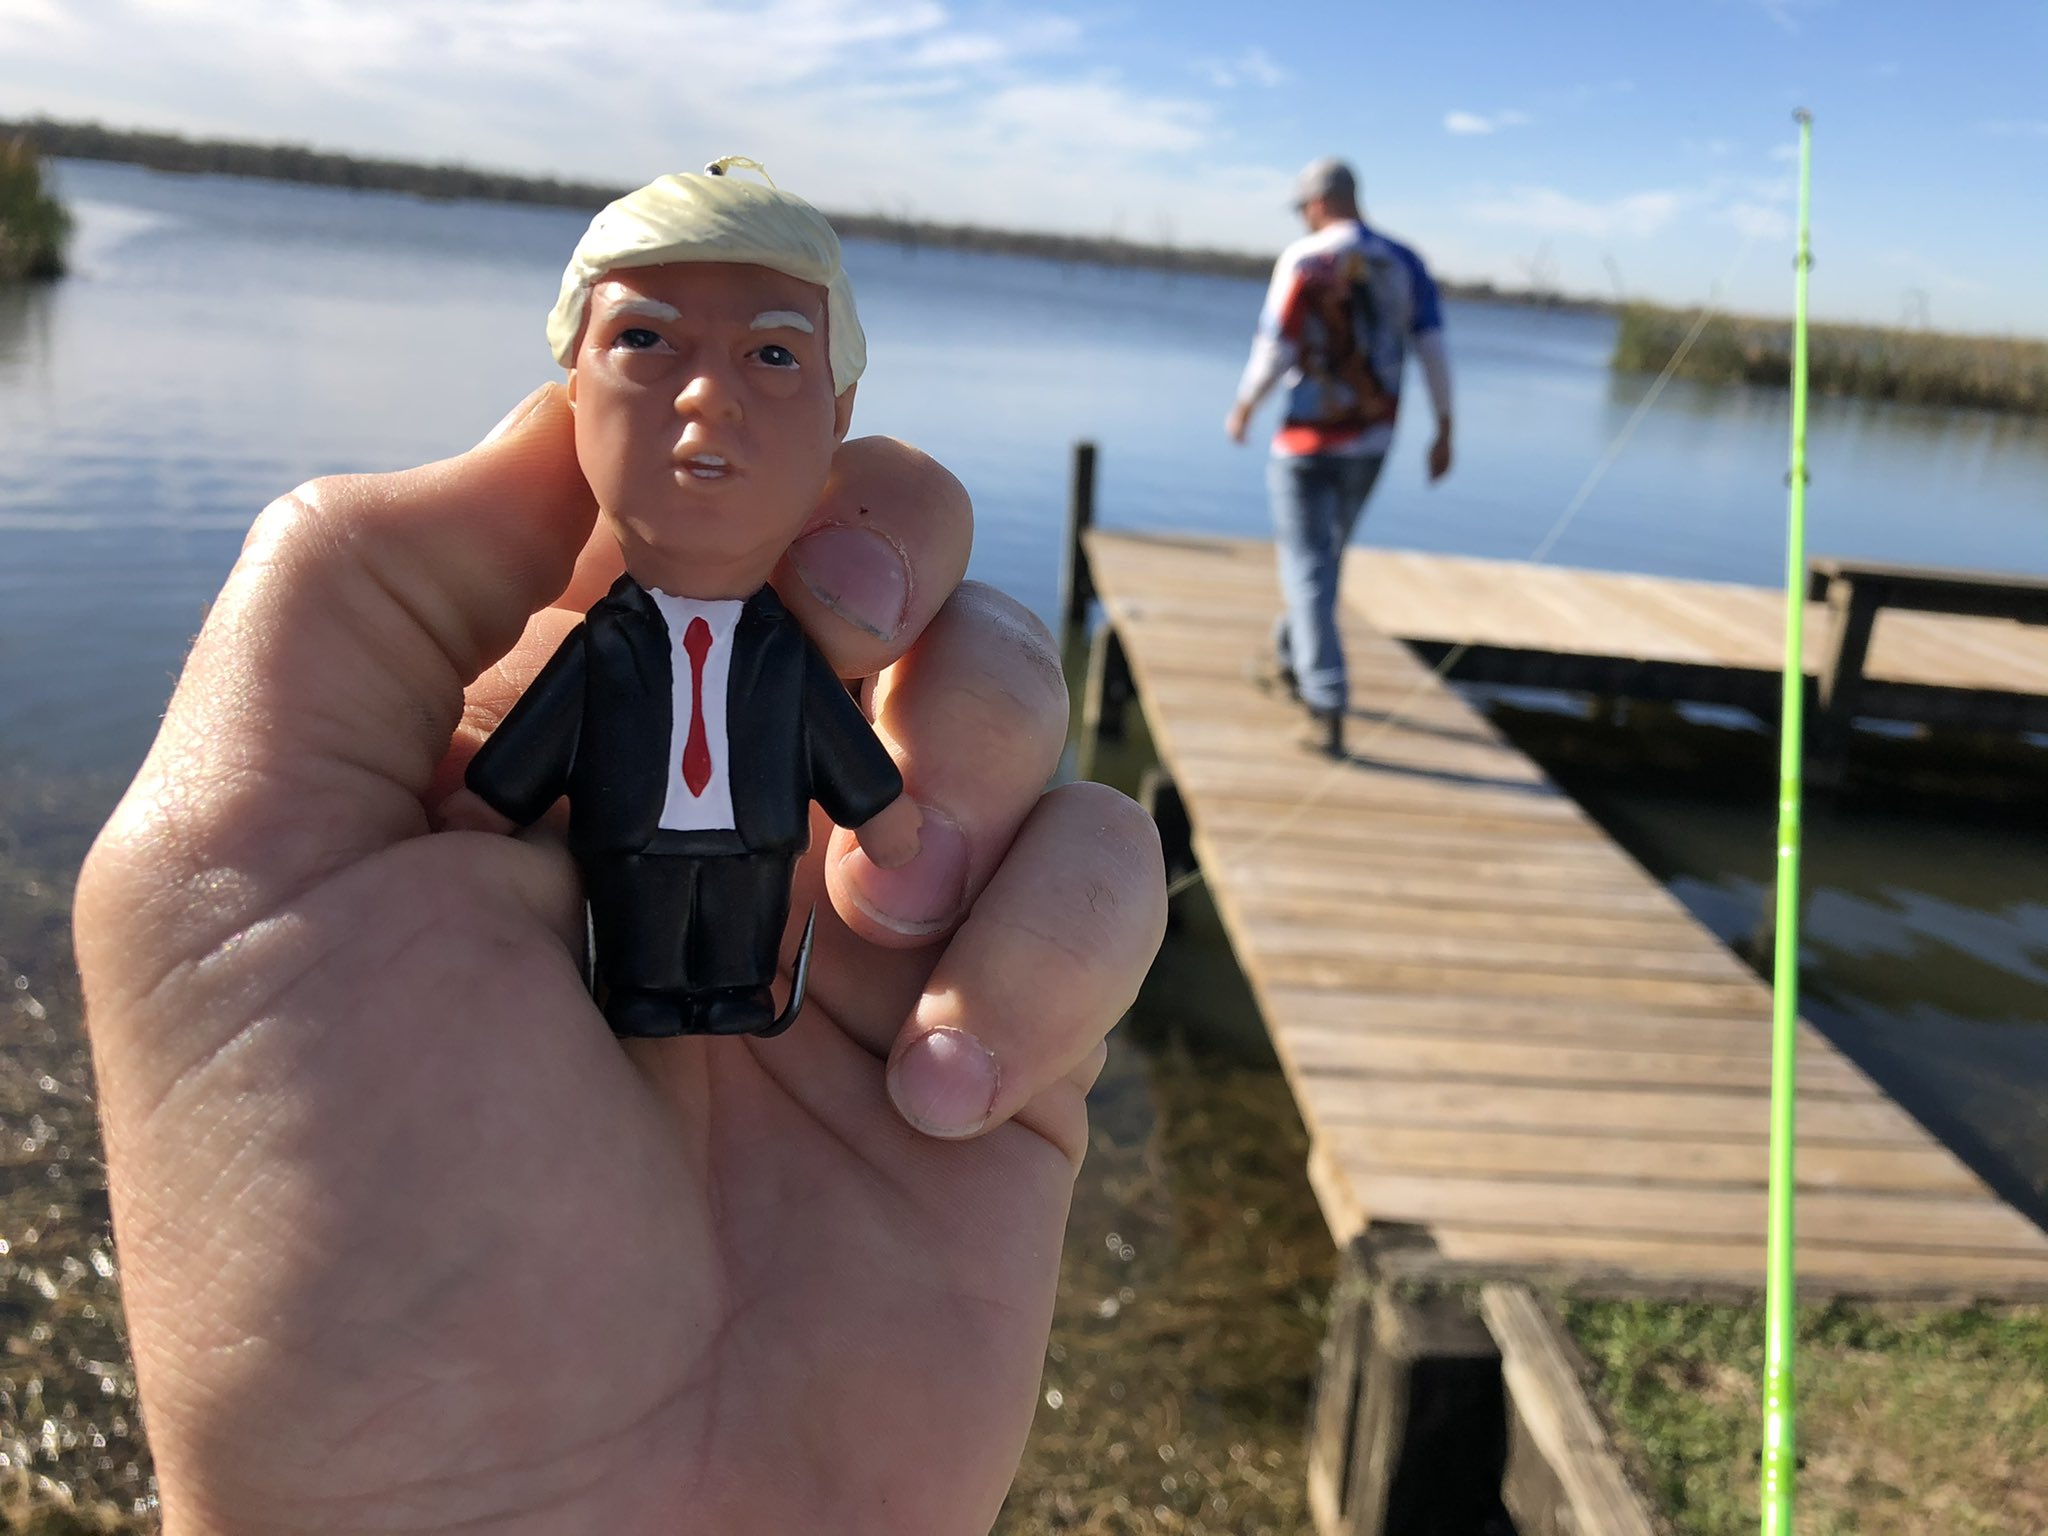 A List Lures on X: Have you ever caught a fish on a Topwater Trump or Biden  Fishing Lure??? 😂😂😂😁 #topwaterfishing #trump #biden #fishinggift  #xmasgift #fishinglure #customlure #gaggift #fishinggear   / X